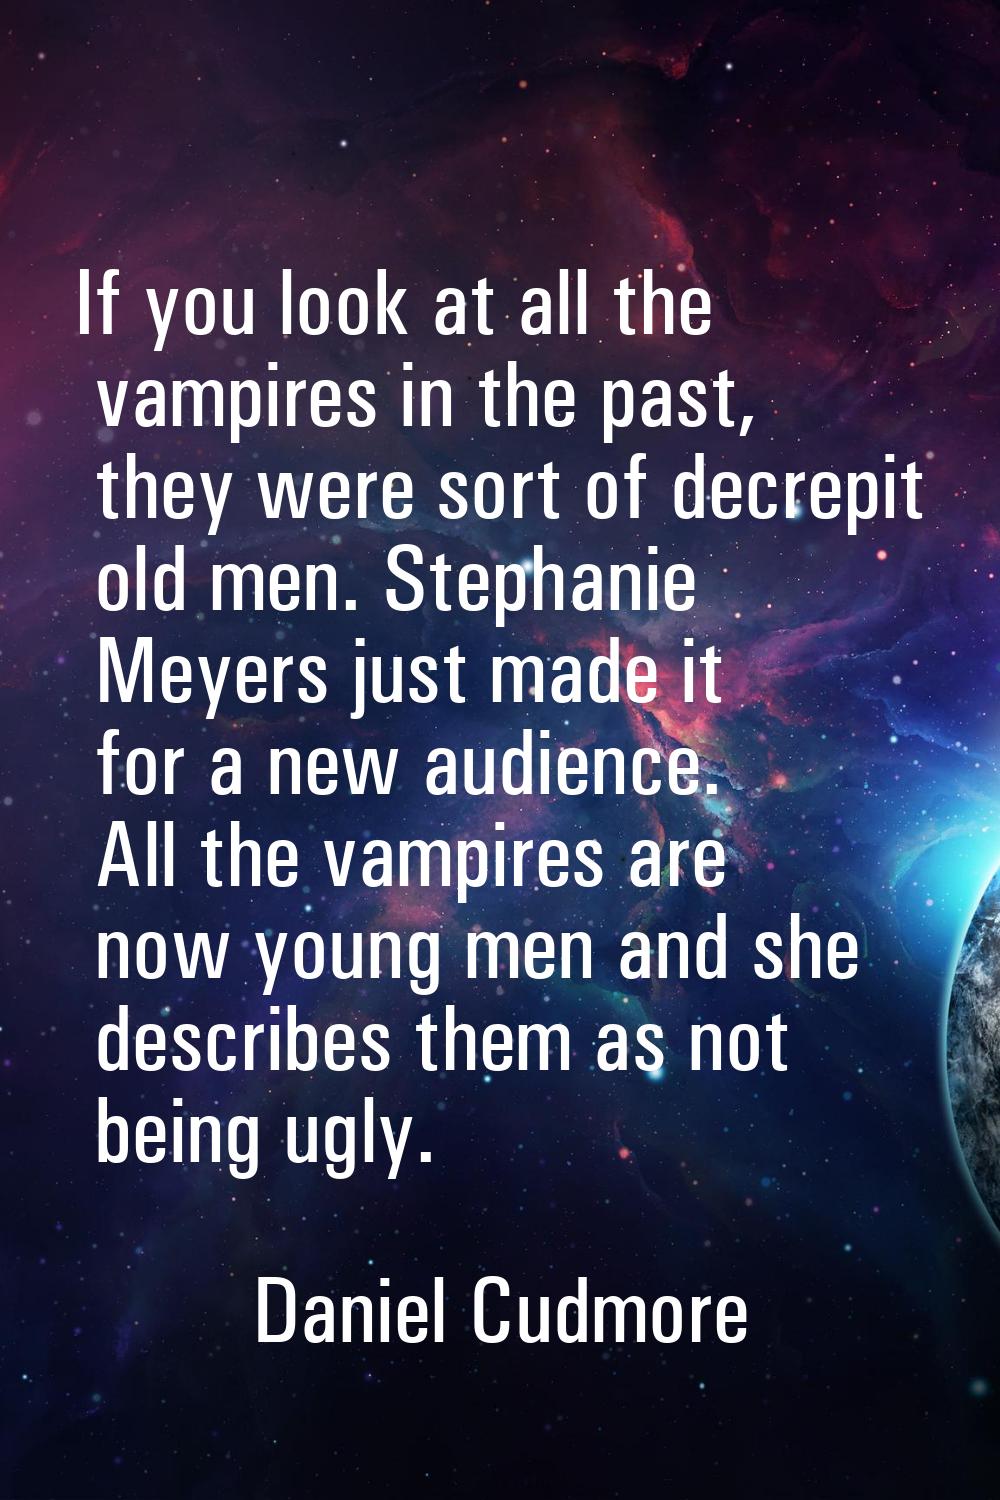 If you look at all the vampires in the past, they were sort of decrepit old men. Stephanie Meyers j